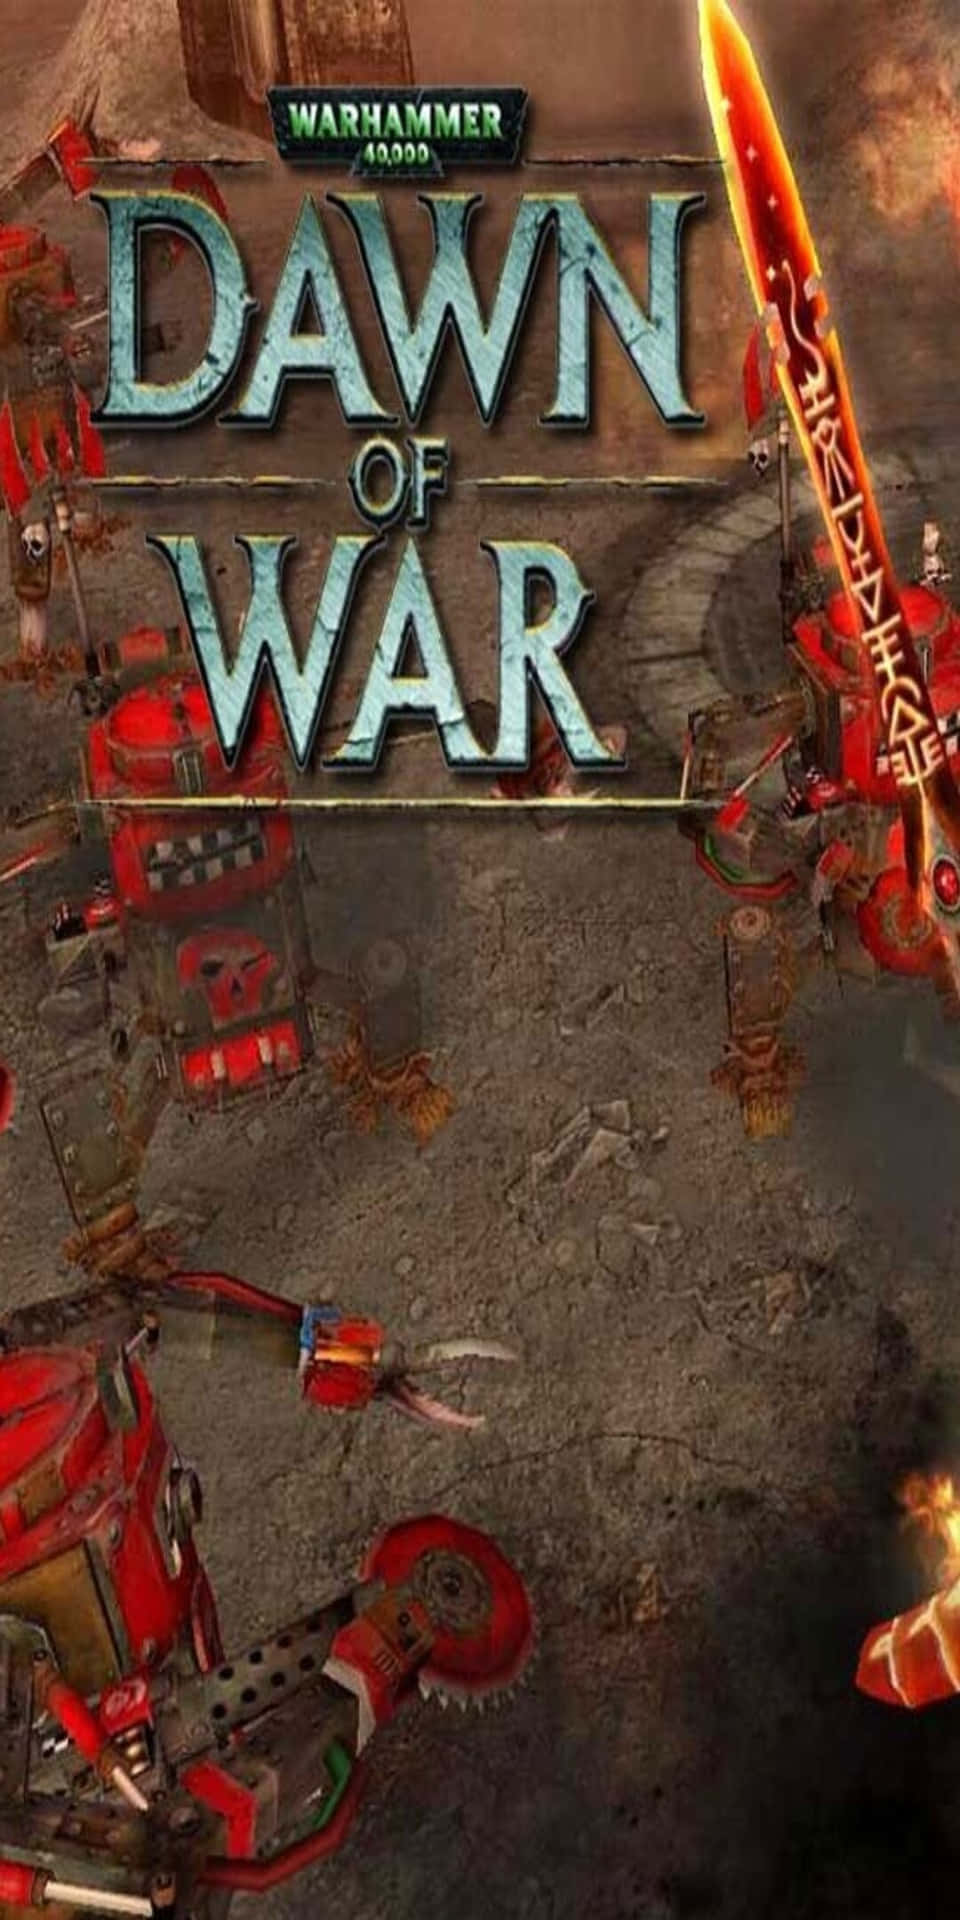 Battle the Forces of Chaos in the Epic Single Player Campaign of Pixel 3 Dawn Of War III